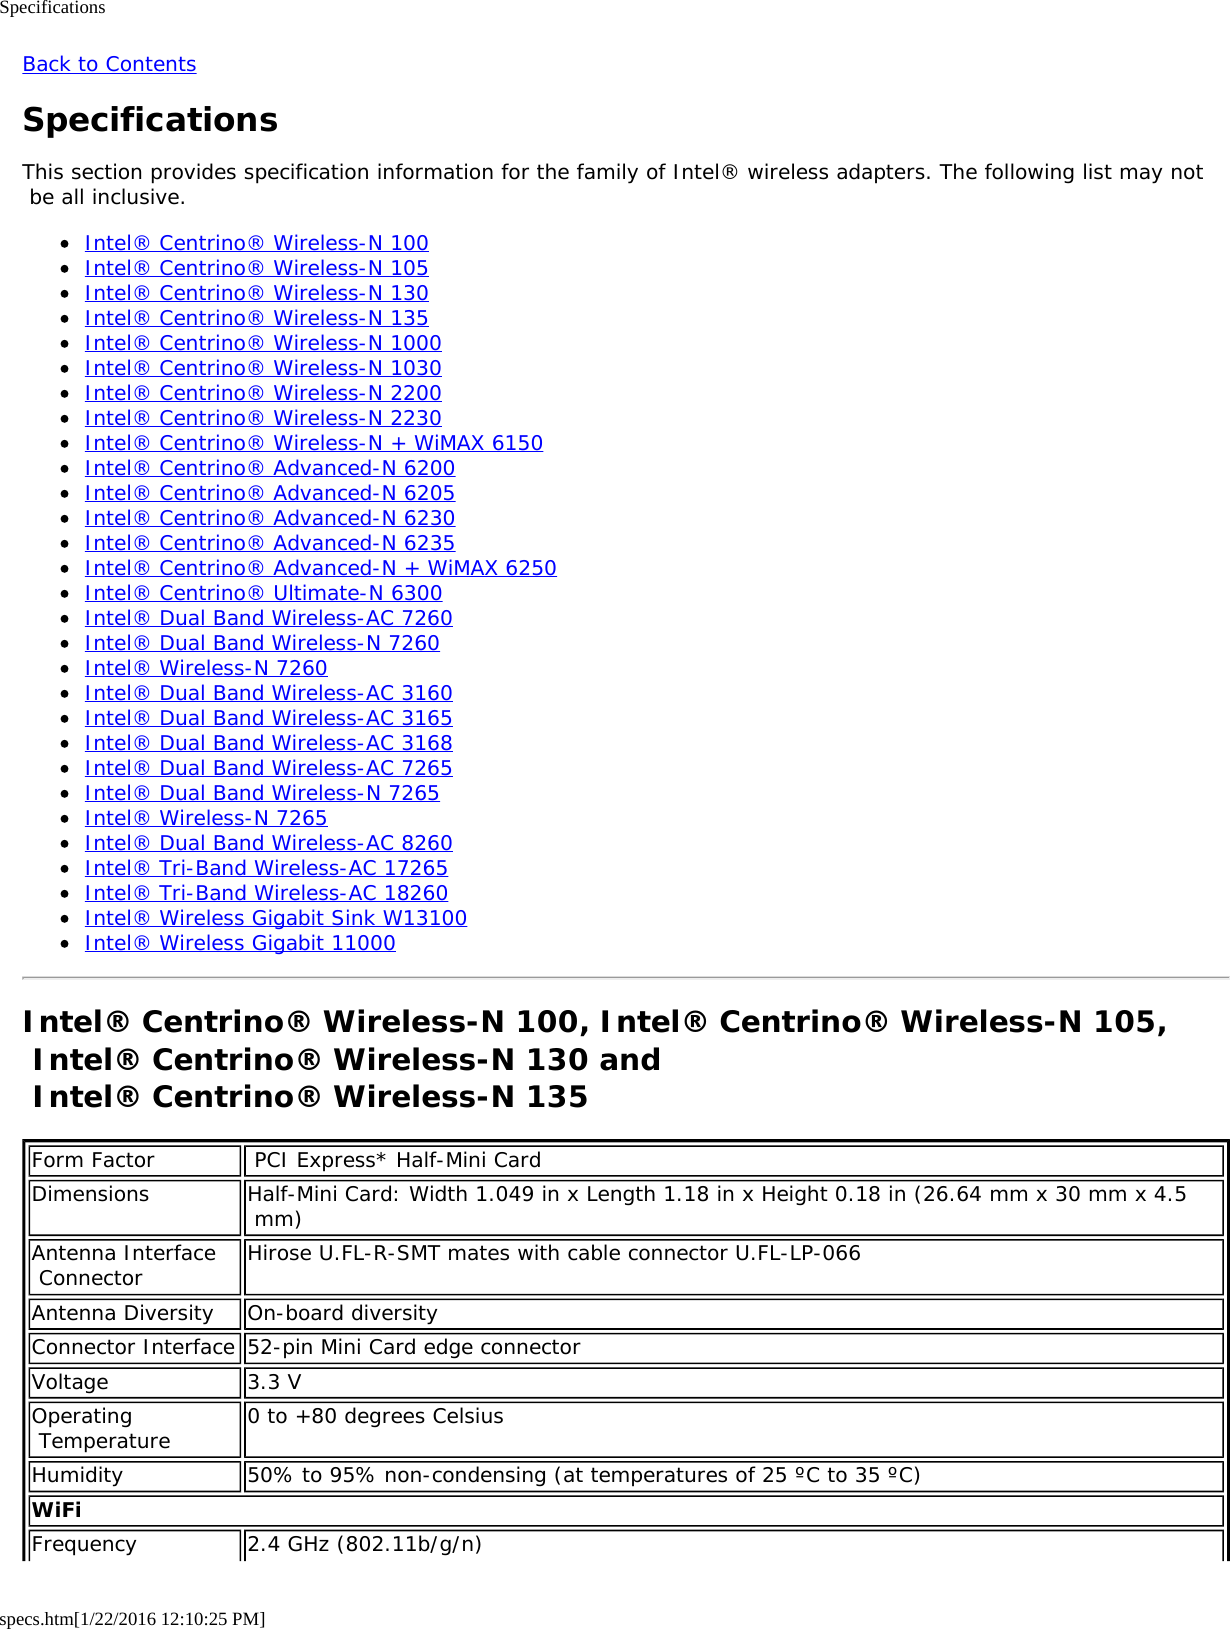 Specificationsspecs.htm[1/22/2016 12:10:25 PM]Back to ContentsSpecificationsThis section provides specification information for the family of Intel® wireless adapters. The following list may not be all inclusive.Intel® Centrino® Wireless-N 100Intel® Centrino® Wireless-N 105Intel® Centrino® Wireless-N 130Intel® Centrino® Wireless-N 135Intel® Centrino® Wireless-N 1000Intel® Centrino® Wireless-N 1030Intel® Centrino® Wireless-N 2200Intel® Centrino® Wireless-N 2230Intel® Centrino® Wireless-N + WiMAX 6150Intel® Centrino® Advanced-N 6200Intel® Centrino® Advanced-N 6205Intel® Centrino® Advanced-N 6230Intel® Centrino® Advanced-N 6235Intel® Centrino® Advanced-N + WiMAX 6250Intel® Centrino® Ultimate-N 6300Intel® Dual Band Wireless-AC 7260Intel® Dual Band Wireless-N 7260Intel® Wireless-N 7260Intel® Dual Band Wireless-AC 3160Intel® Dual Band Wireless-AC 3165Intel® Dual Band Wireless-AC 3168Intel® Dual Band Wireless-AC 7265Intel® Dual Band Wireless-N 7265Intel® Wireless-N 7265Intel® Dual Band Wireless-AC 8260Intel® Tri-Band Wireless-AC 17265Intel® Tri-Band Wireless-AC 18260Intel® Wireless Gigabit Sink W13100Intel® Wireless Gigabit 11000Intel® Centrino® Wireless-N 100, Intel® Centrino® Wireless-N 105, Intel® Centrino® Wireless-N 130 and  Intel® Centrino® Wireless-N 135Form Factor  PCI Express* Half-Mini CardDimensions Half-Mini Card: Width 1.049 in x Length 1.18 in x Height 0.18 in (26.64 mm x 30 mm x 4.5 mm)Antenna Interface Connector Hirose U.FL-R-SMT mates with cable connector U.FL-LP-066Antenna Diversity On-board diversityConnector Interface 52-pin Mini Card edge connectorVoltage 3.3 VOperating Temperature 0 to +80 degrees CelsiusHumidity 50% to 95% non-condensing (at temperatures of 25 ºC to 35 ºC)WiFiFrequency 2.4 GHz (802.11b/g/n)